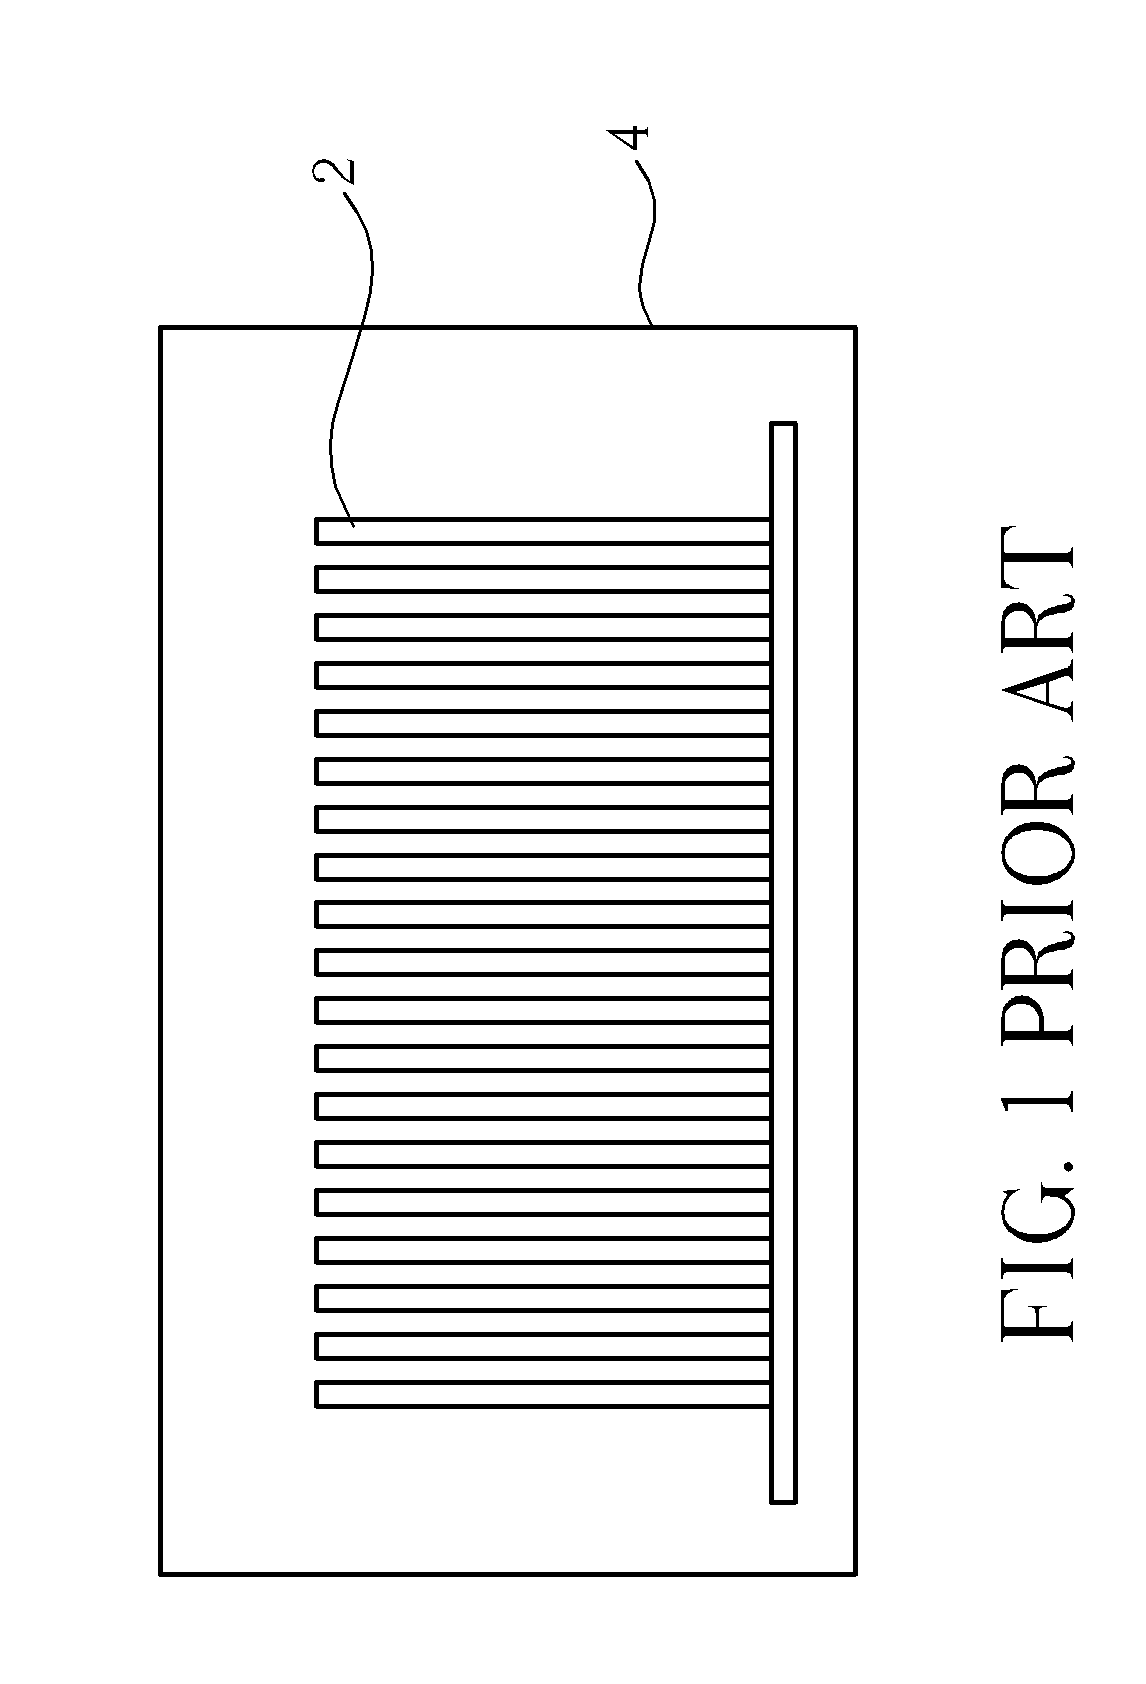 Method for storing wafers